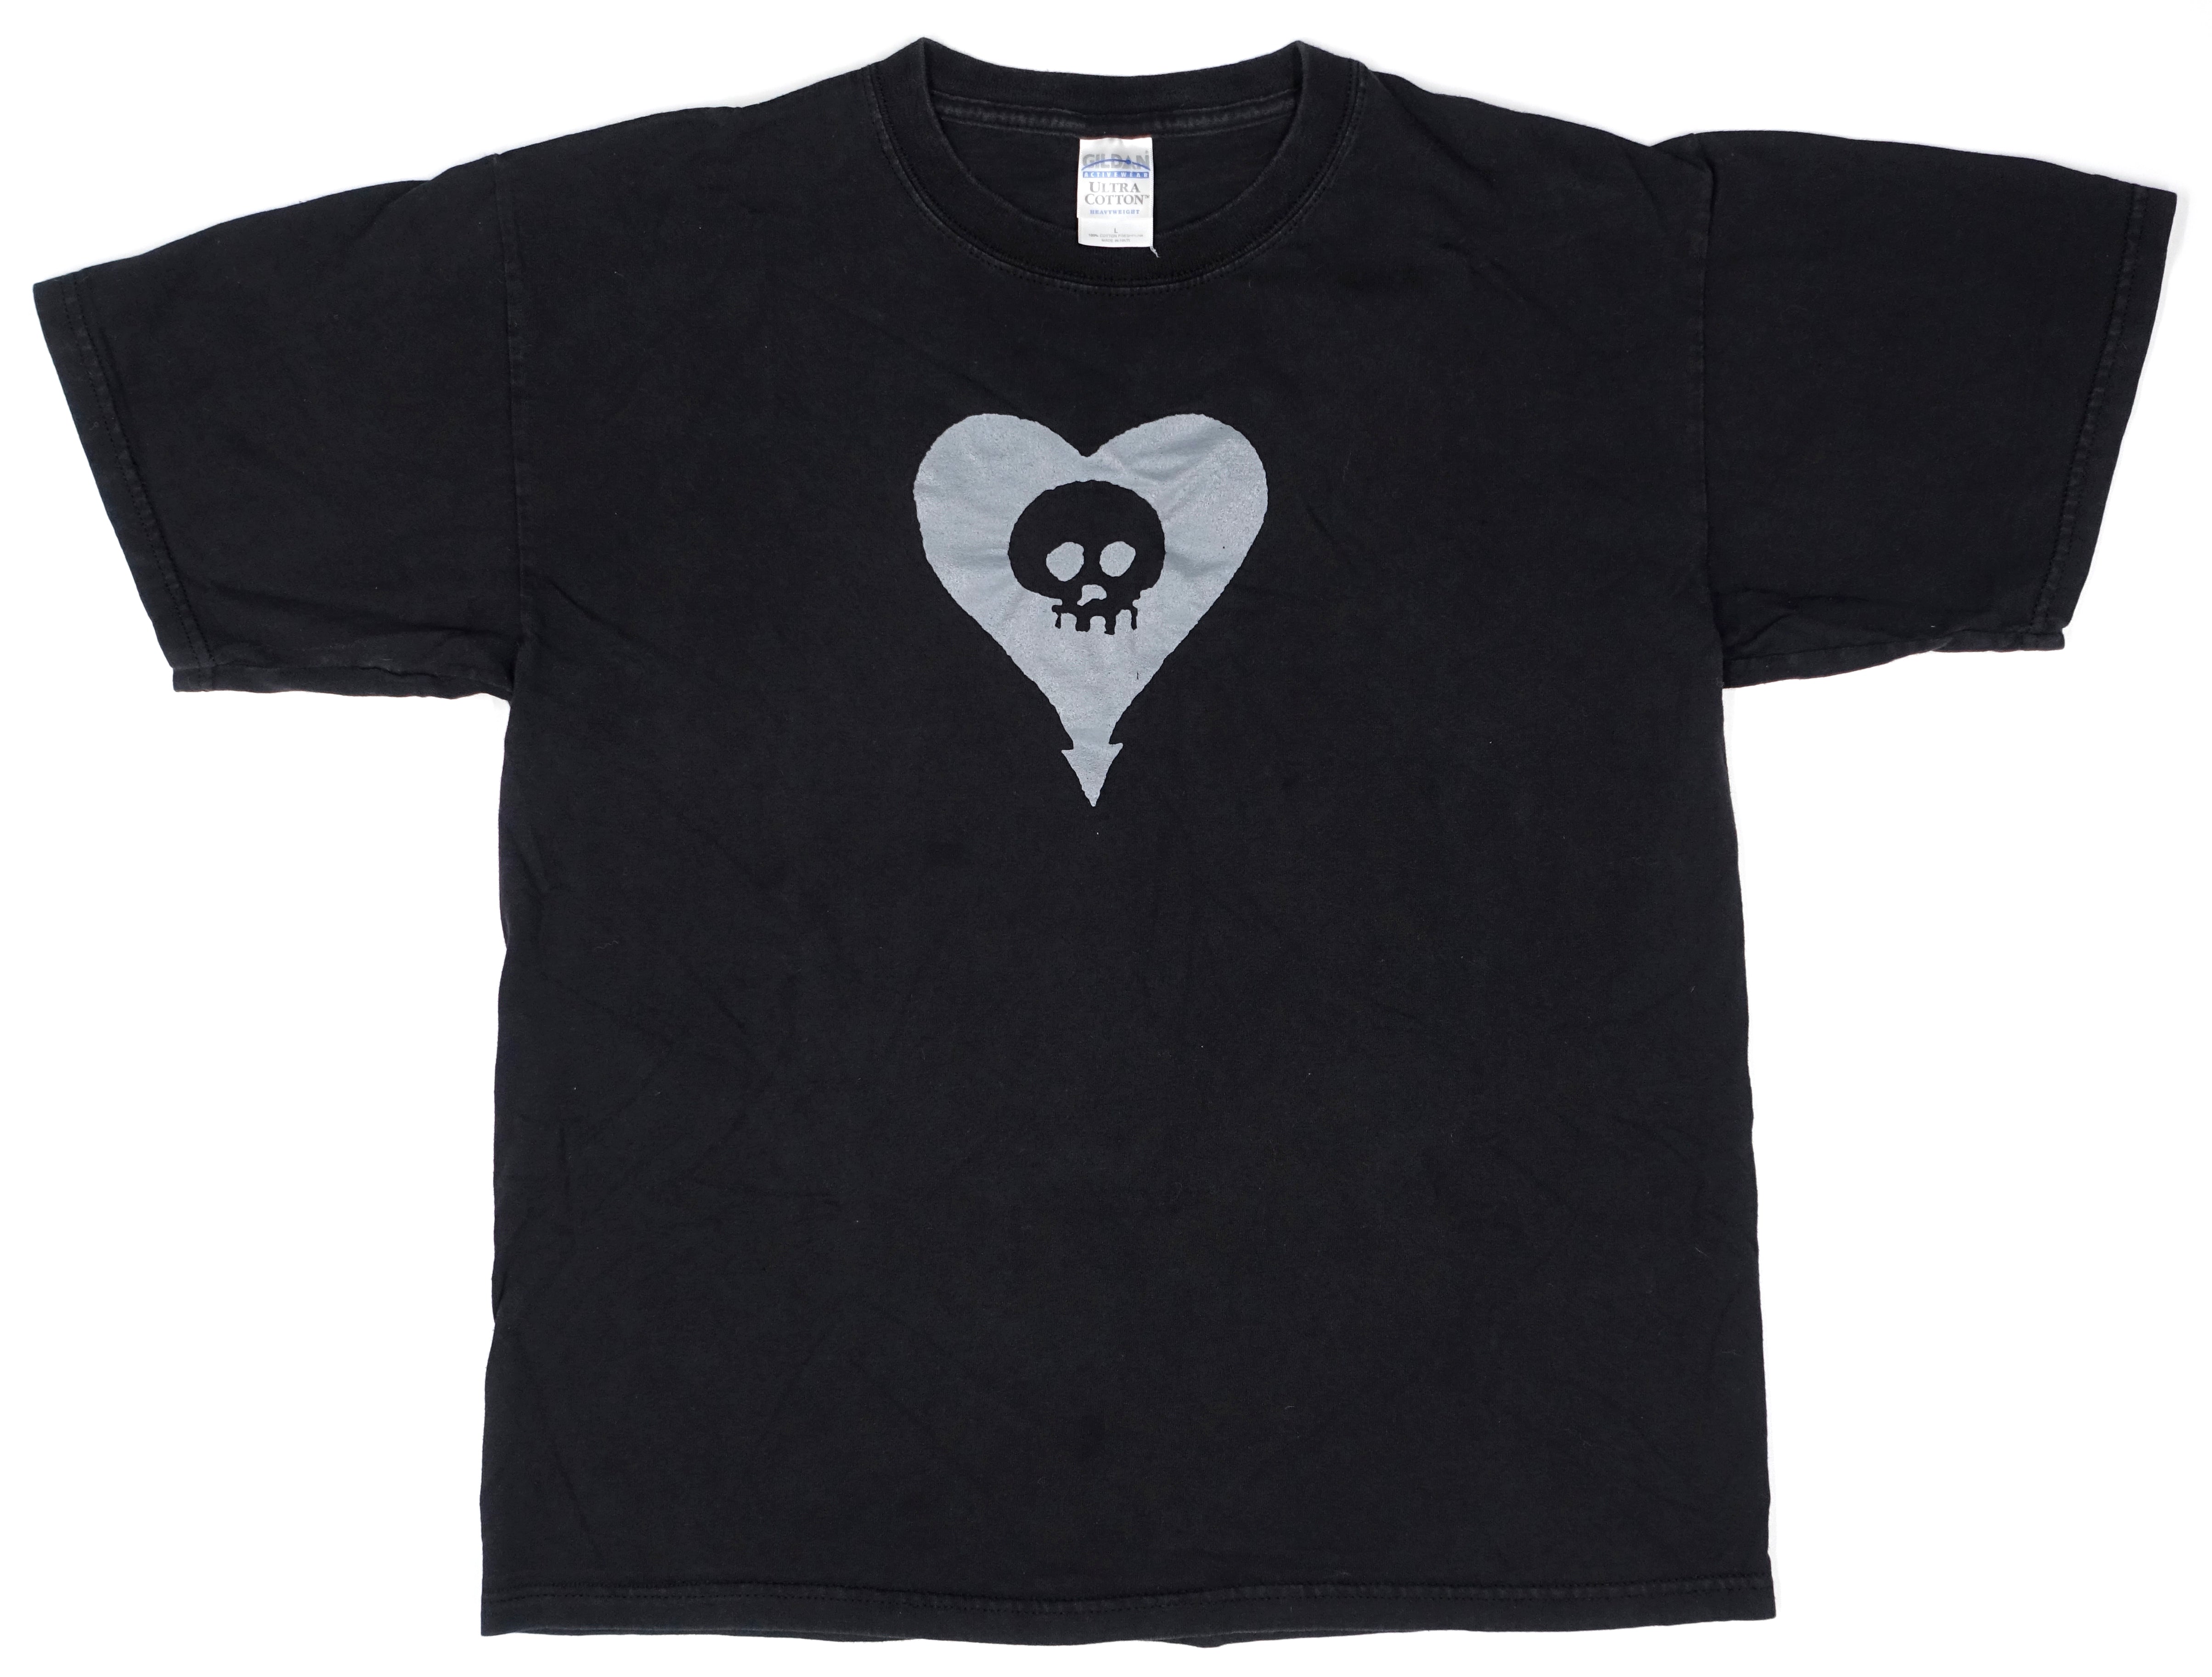 Alkaline Trio – Skull Heart From Here To Infirmary 2001 Tour Shirt Size Large